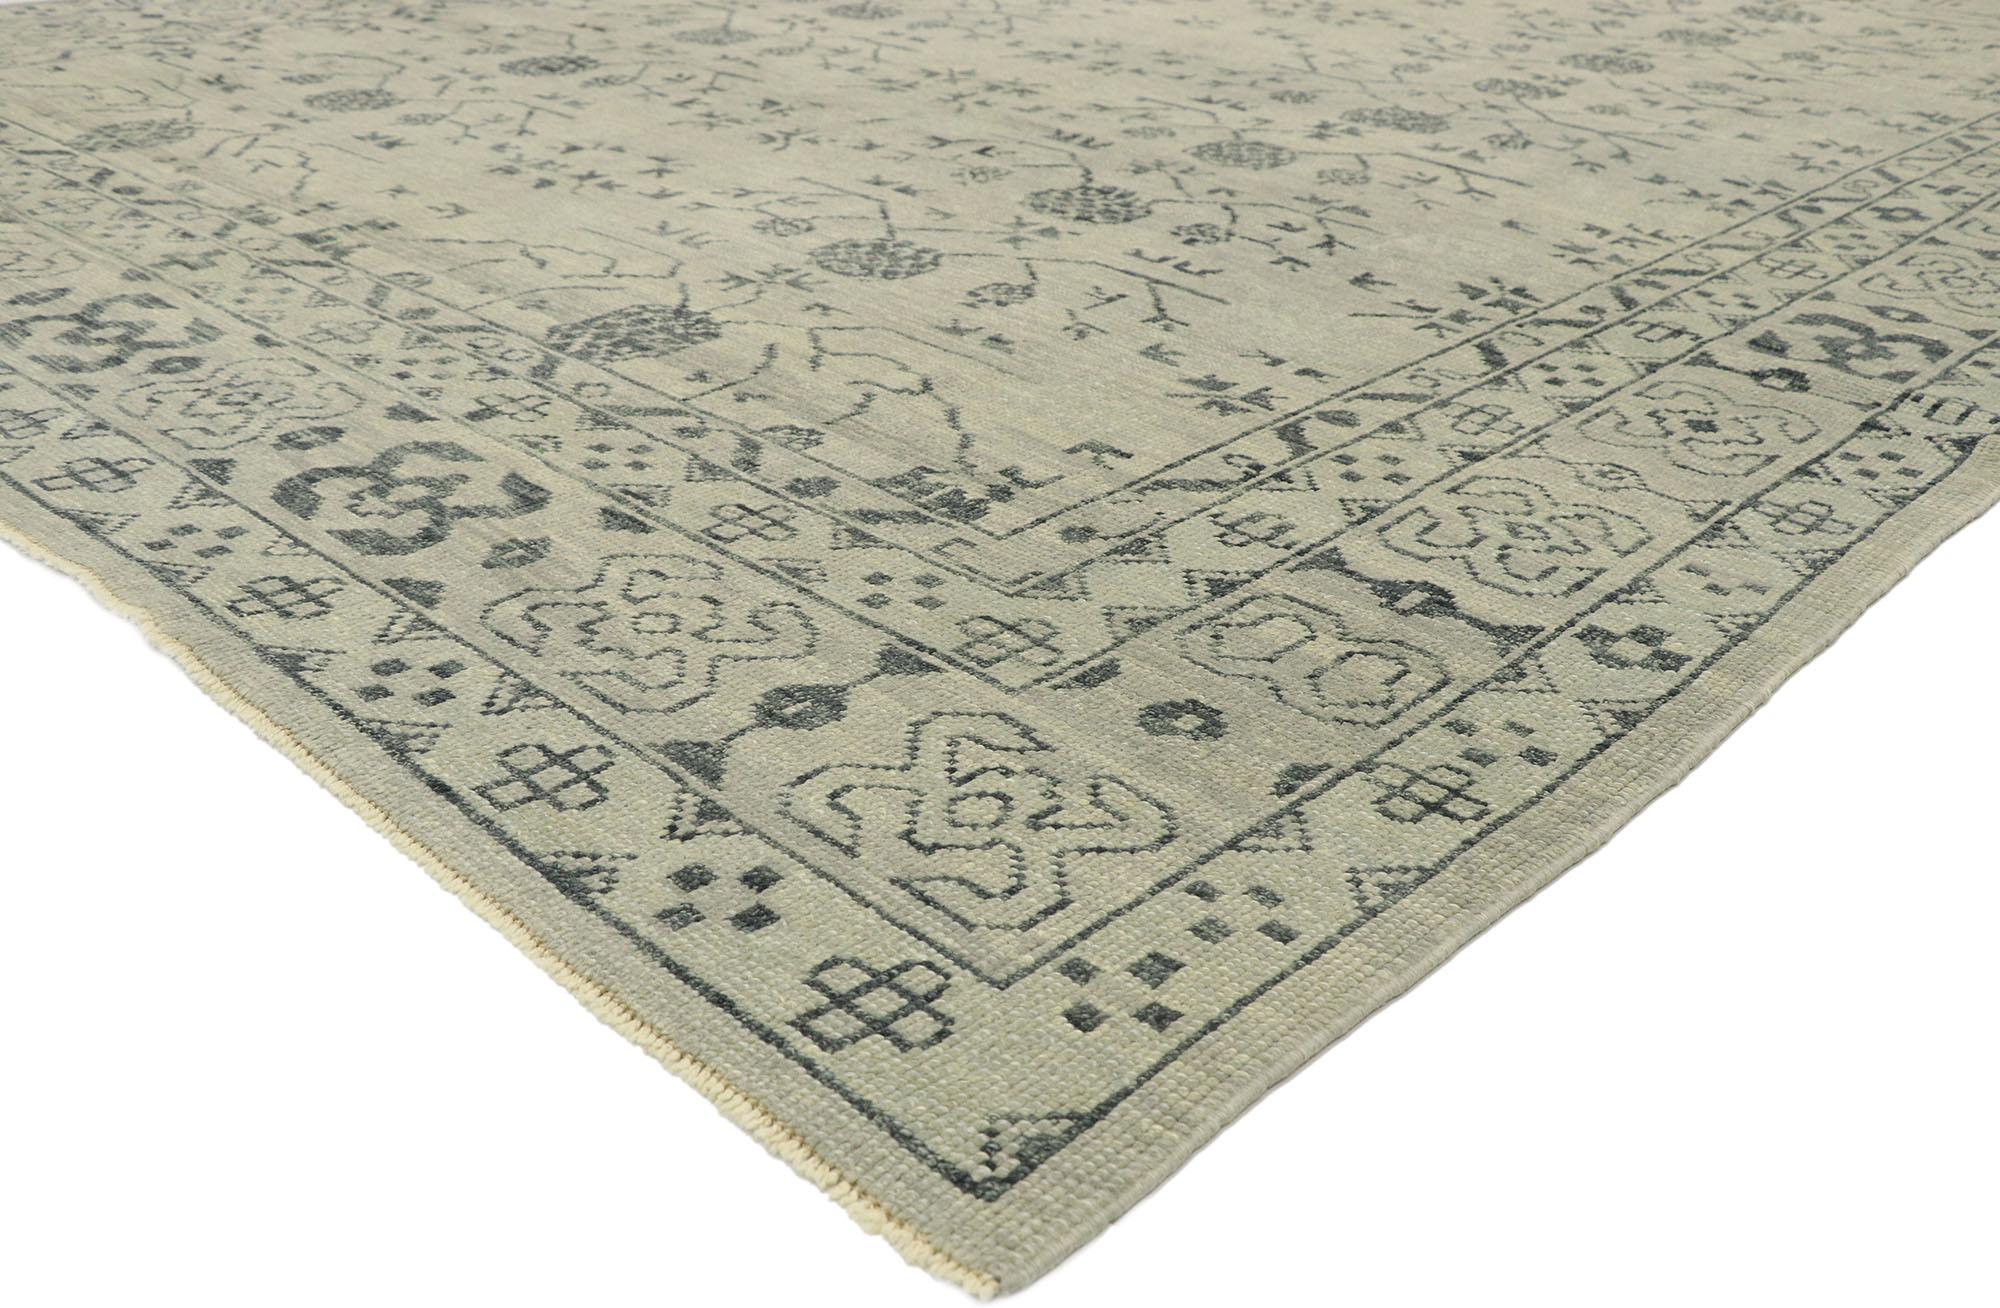 52914 New Contemporary Turkish Khotan rug with Modern Transitional style. Blending elements from the modern world with light and airy colors, this hand knotted wool contemporary Turkish Khotan rug will boost the coziness factor in nearly any space.